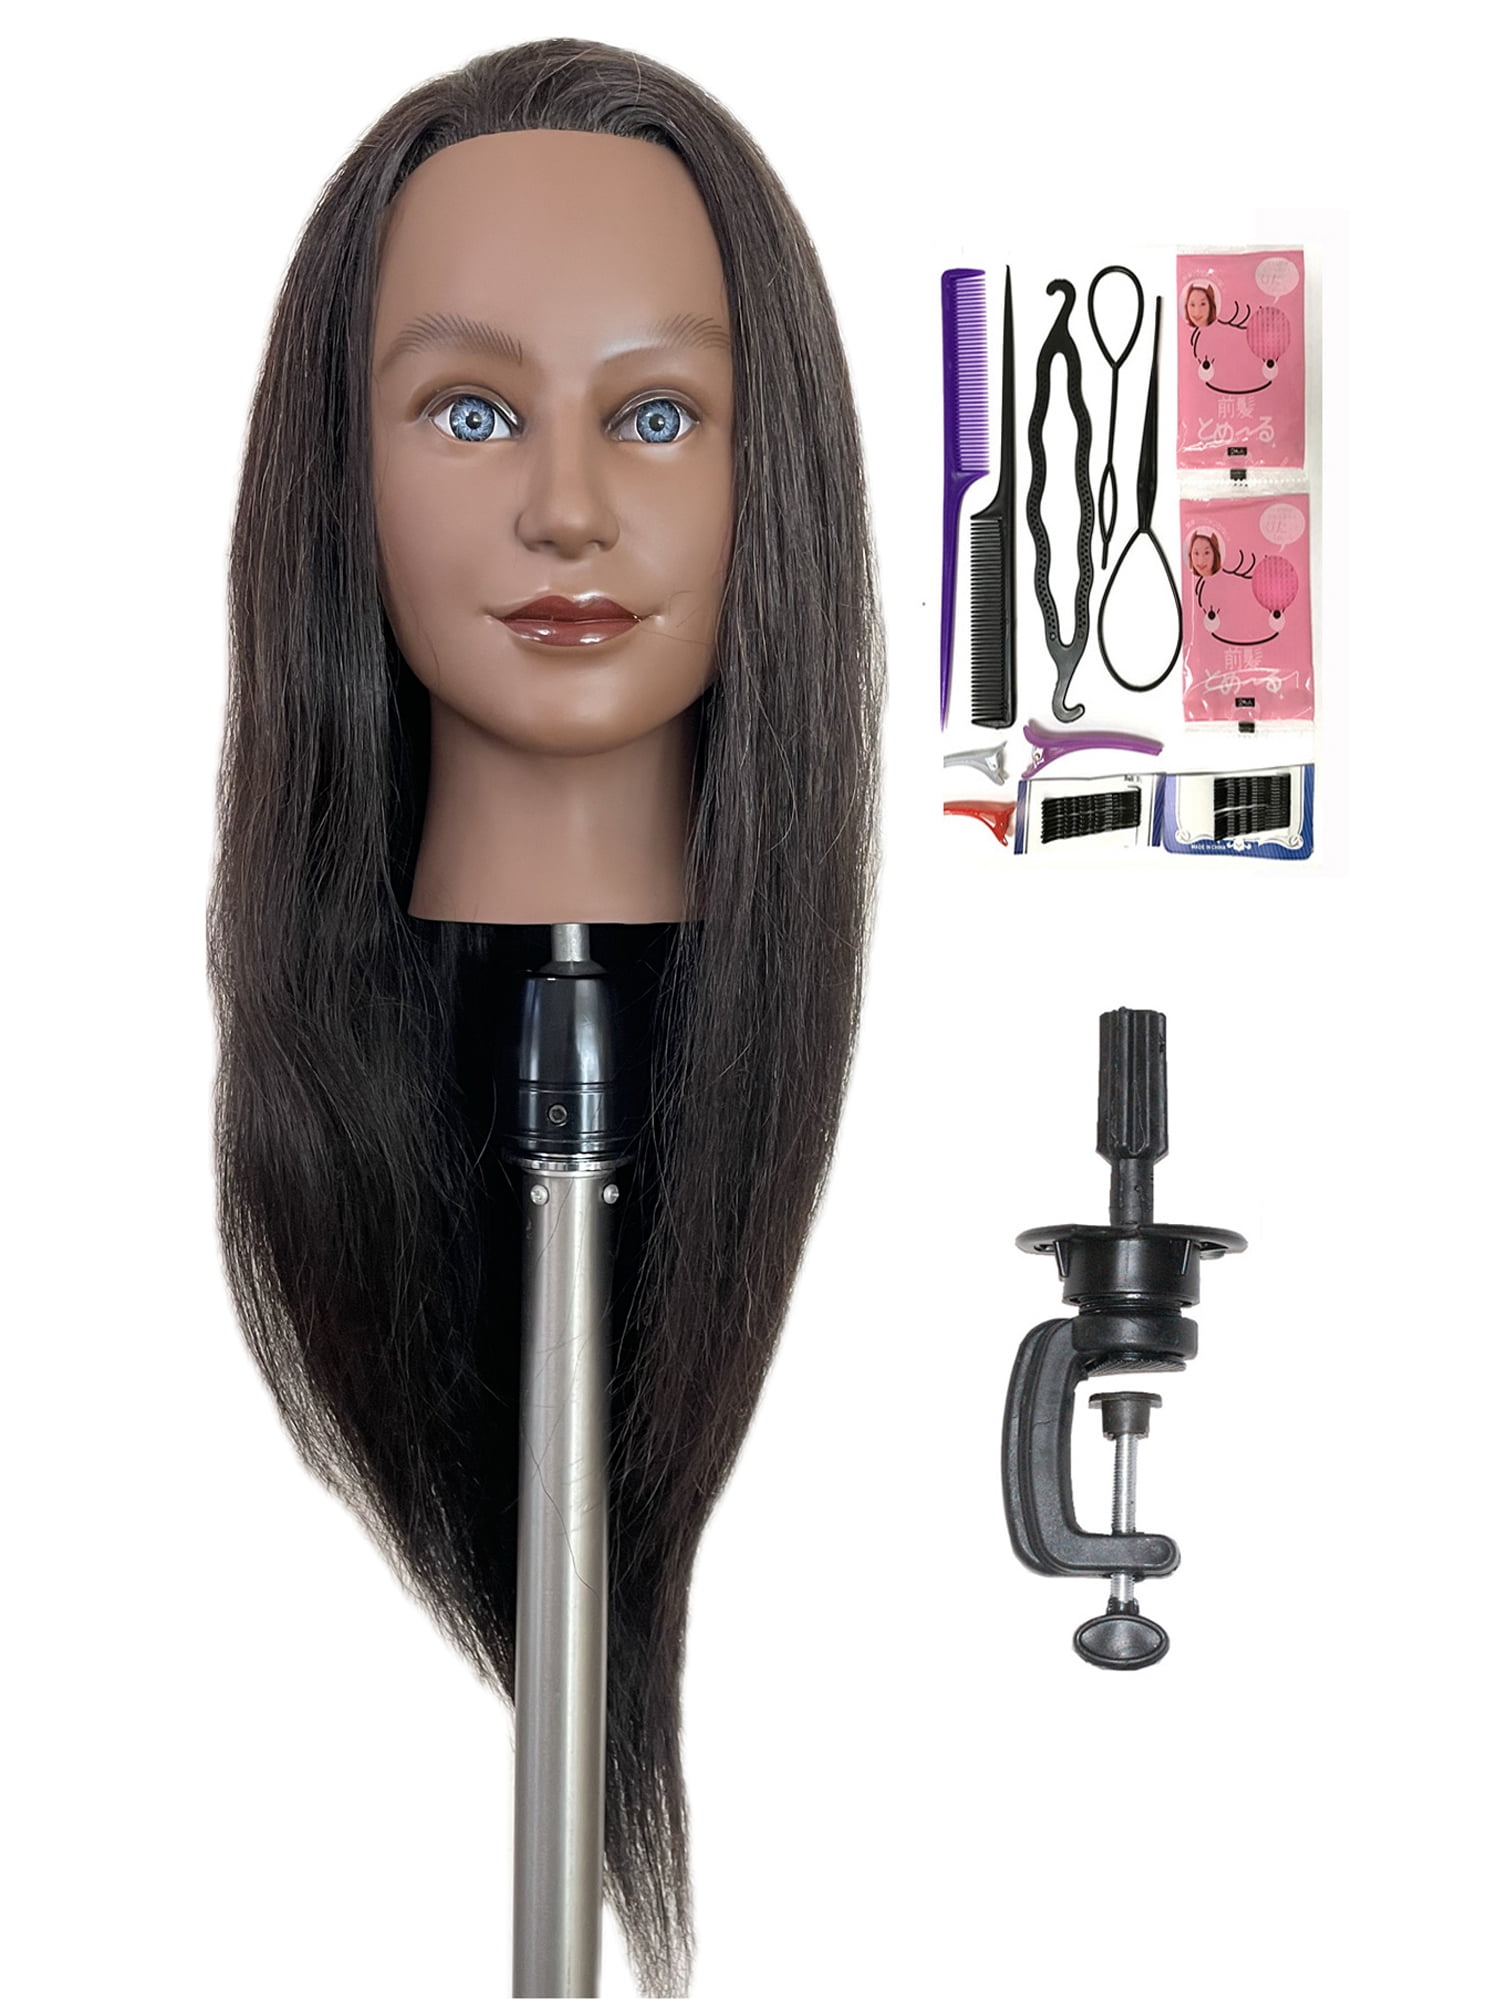 Limei Styrofoam Wig Head 12.6 inch - Tall Female Foam Mannequin Wig Stand and Holder for Style, Model for Display Hair, Hairpieces and Hats, Mask 